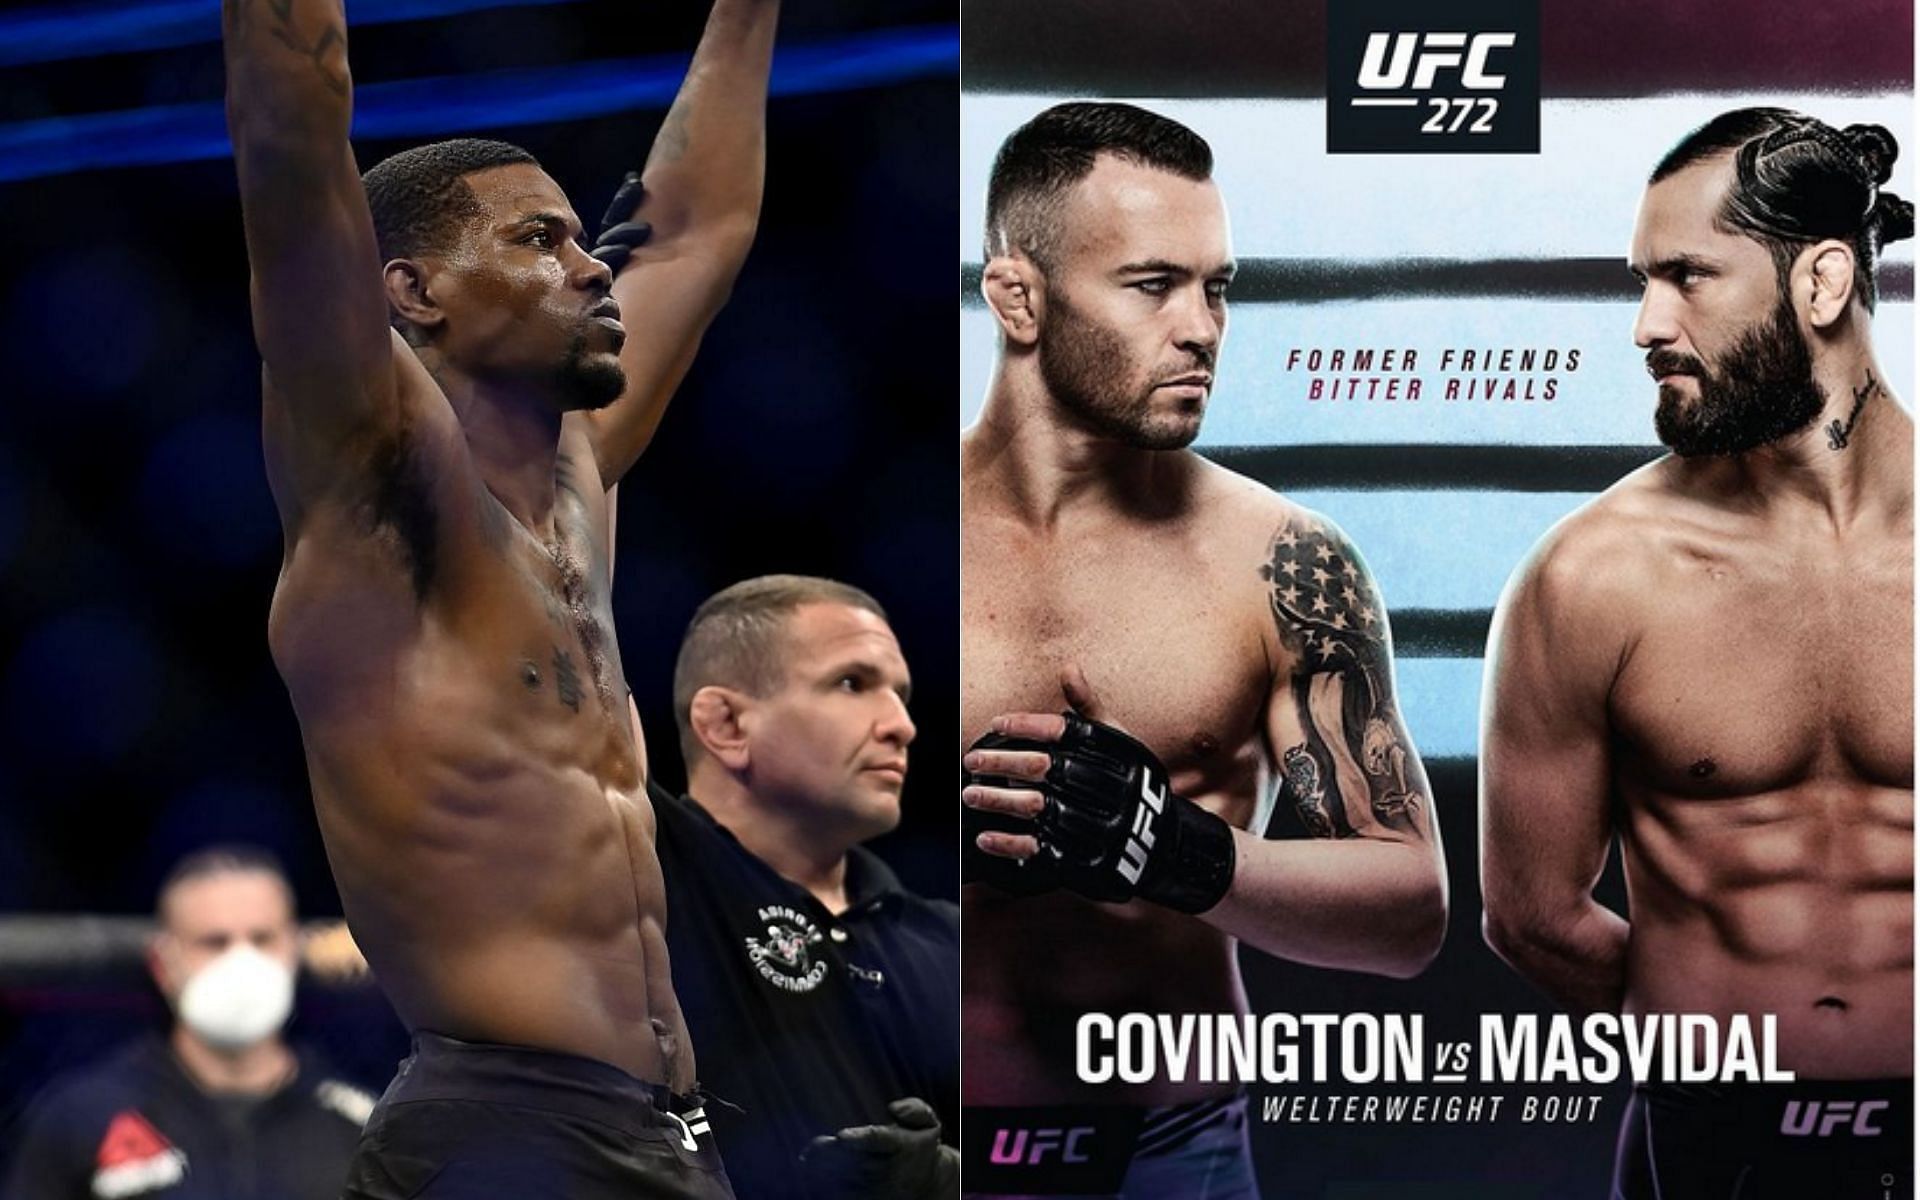 Kevin Holland (left) and Colby Covington vs. Jorge Masvidal (right) [Image credits: @ufc on Instagram]